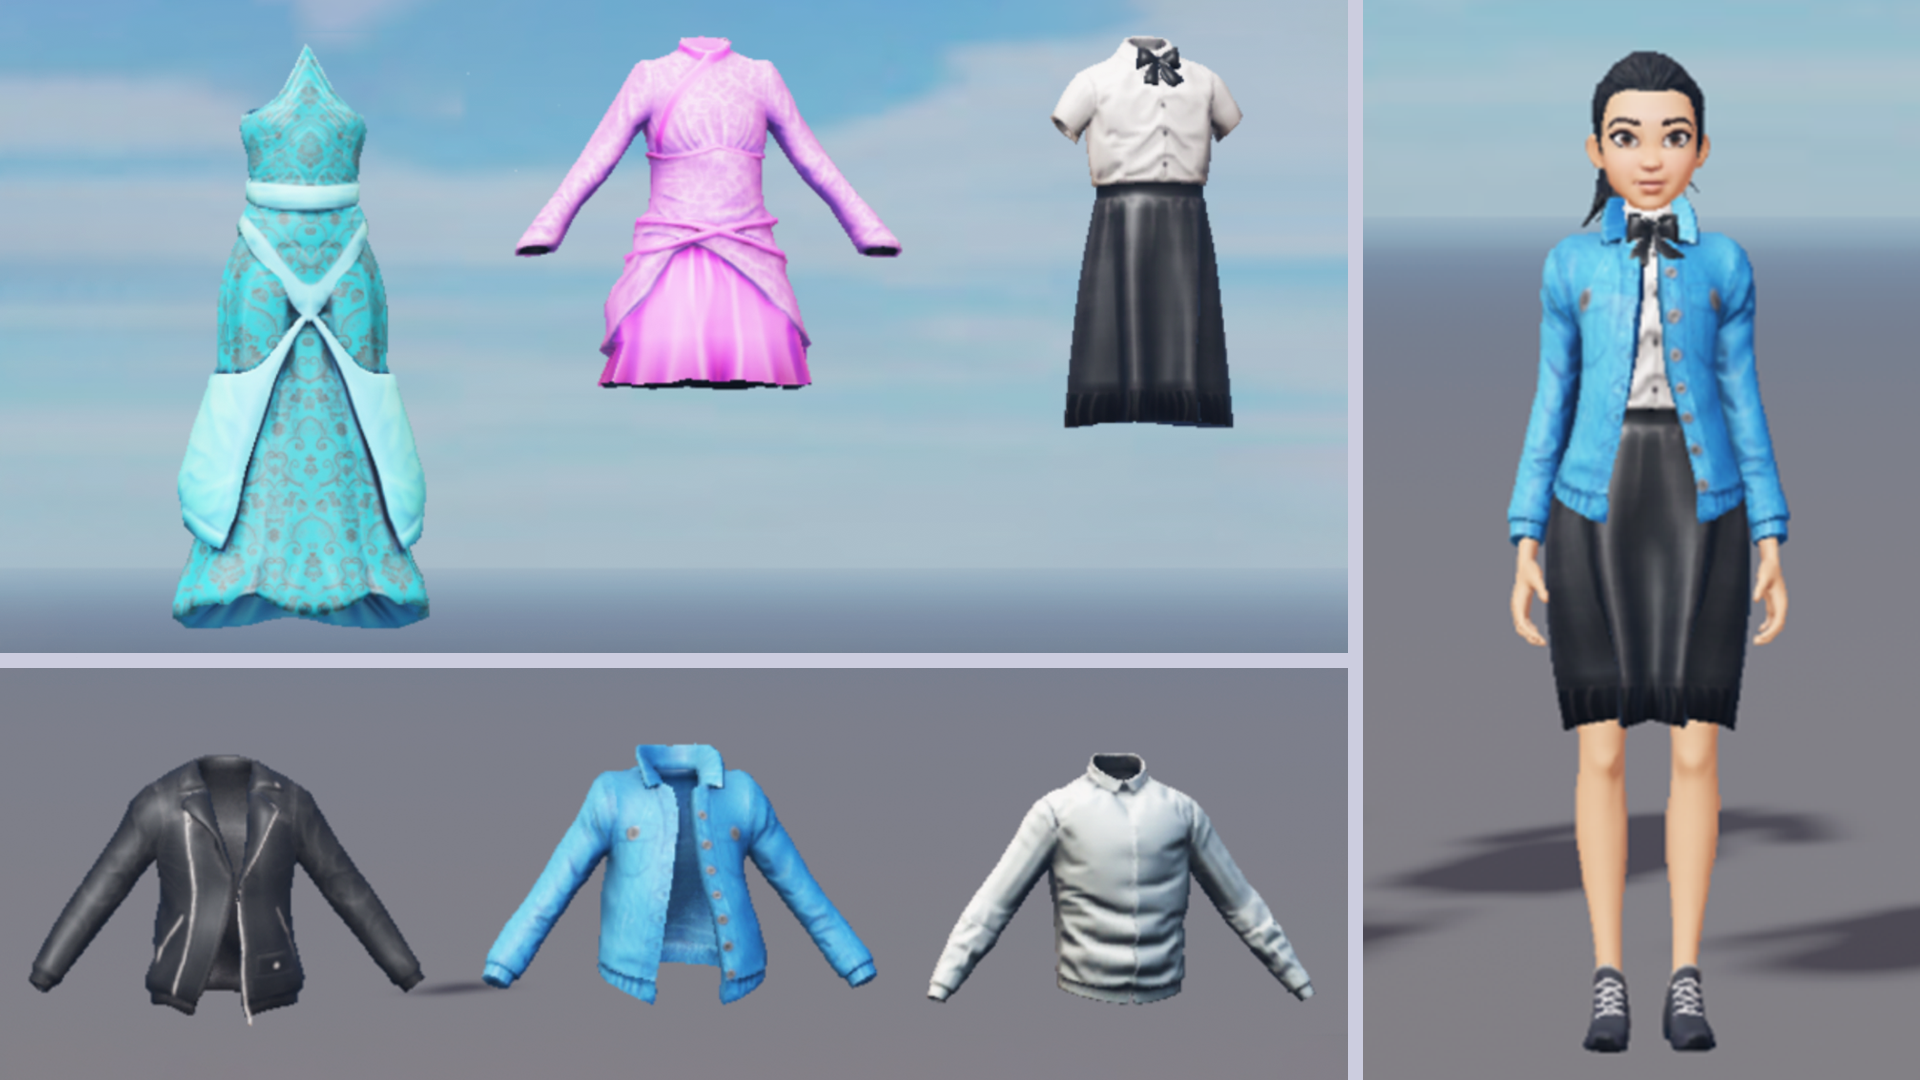 All Roblox Clothes in Roblox Clothes